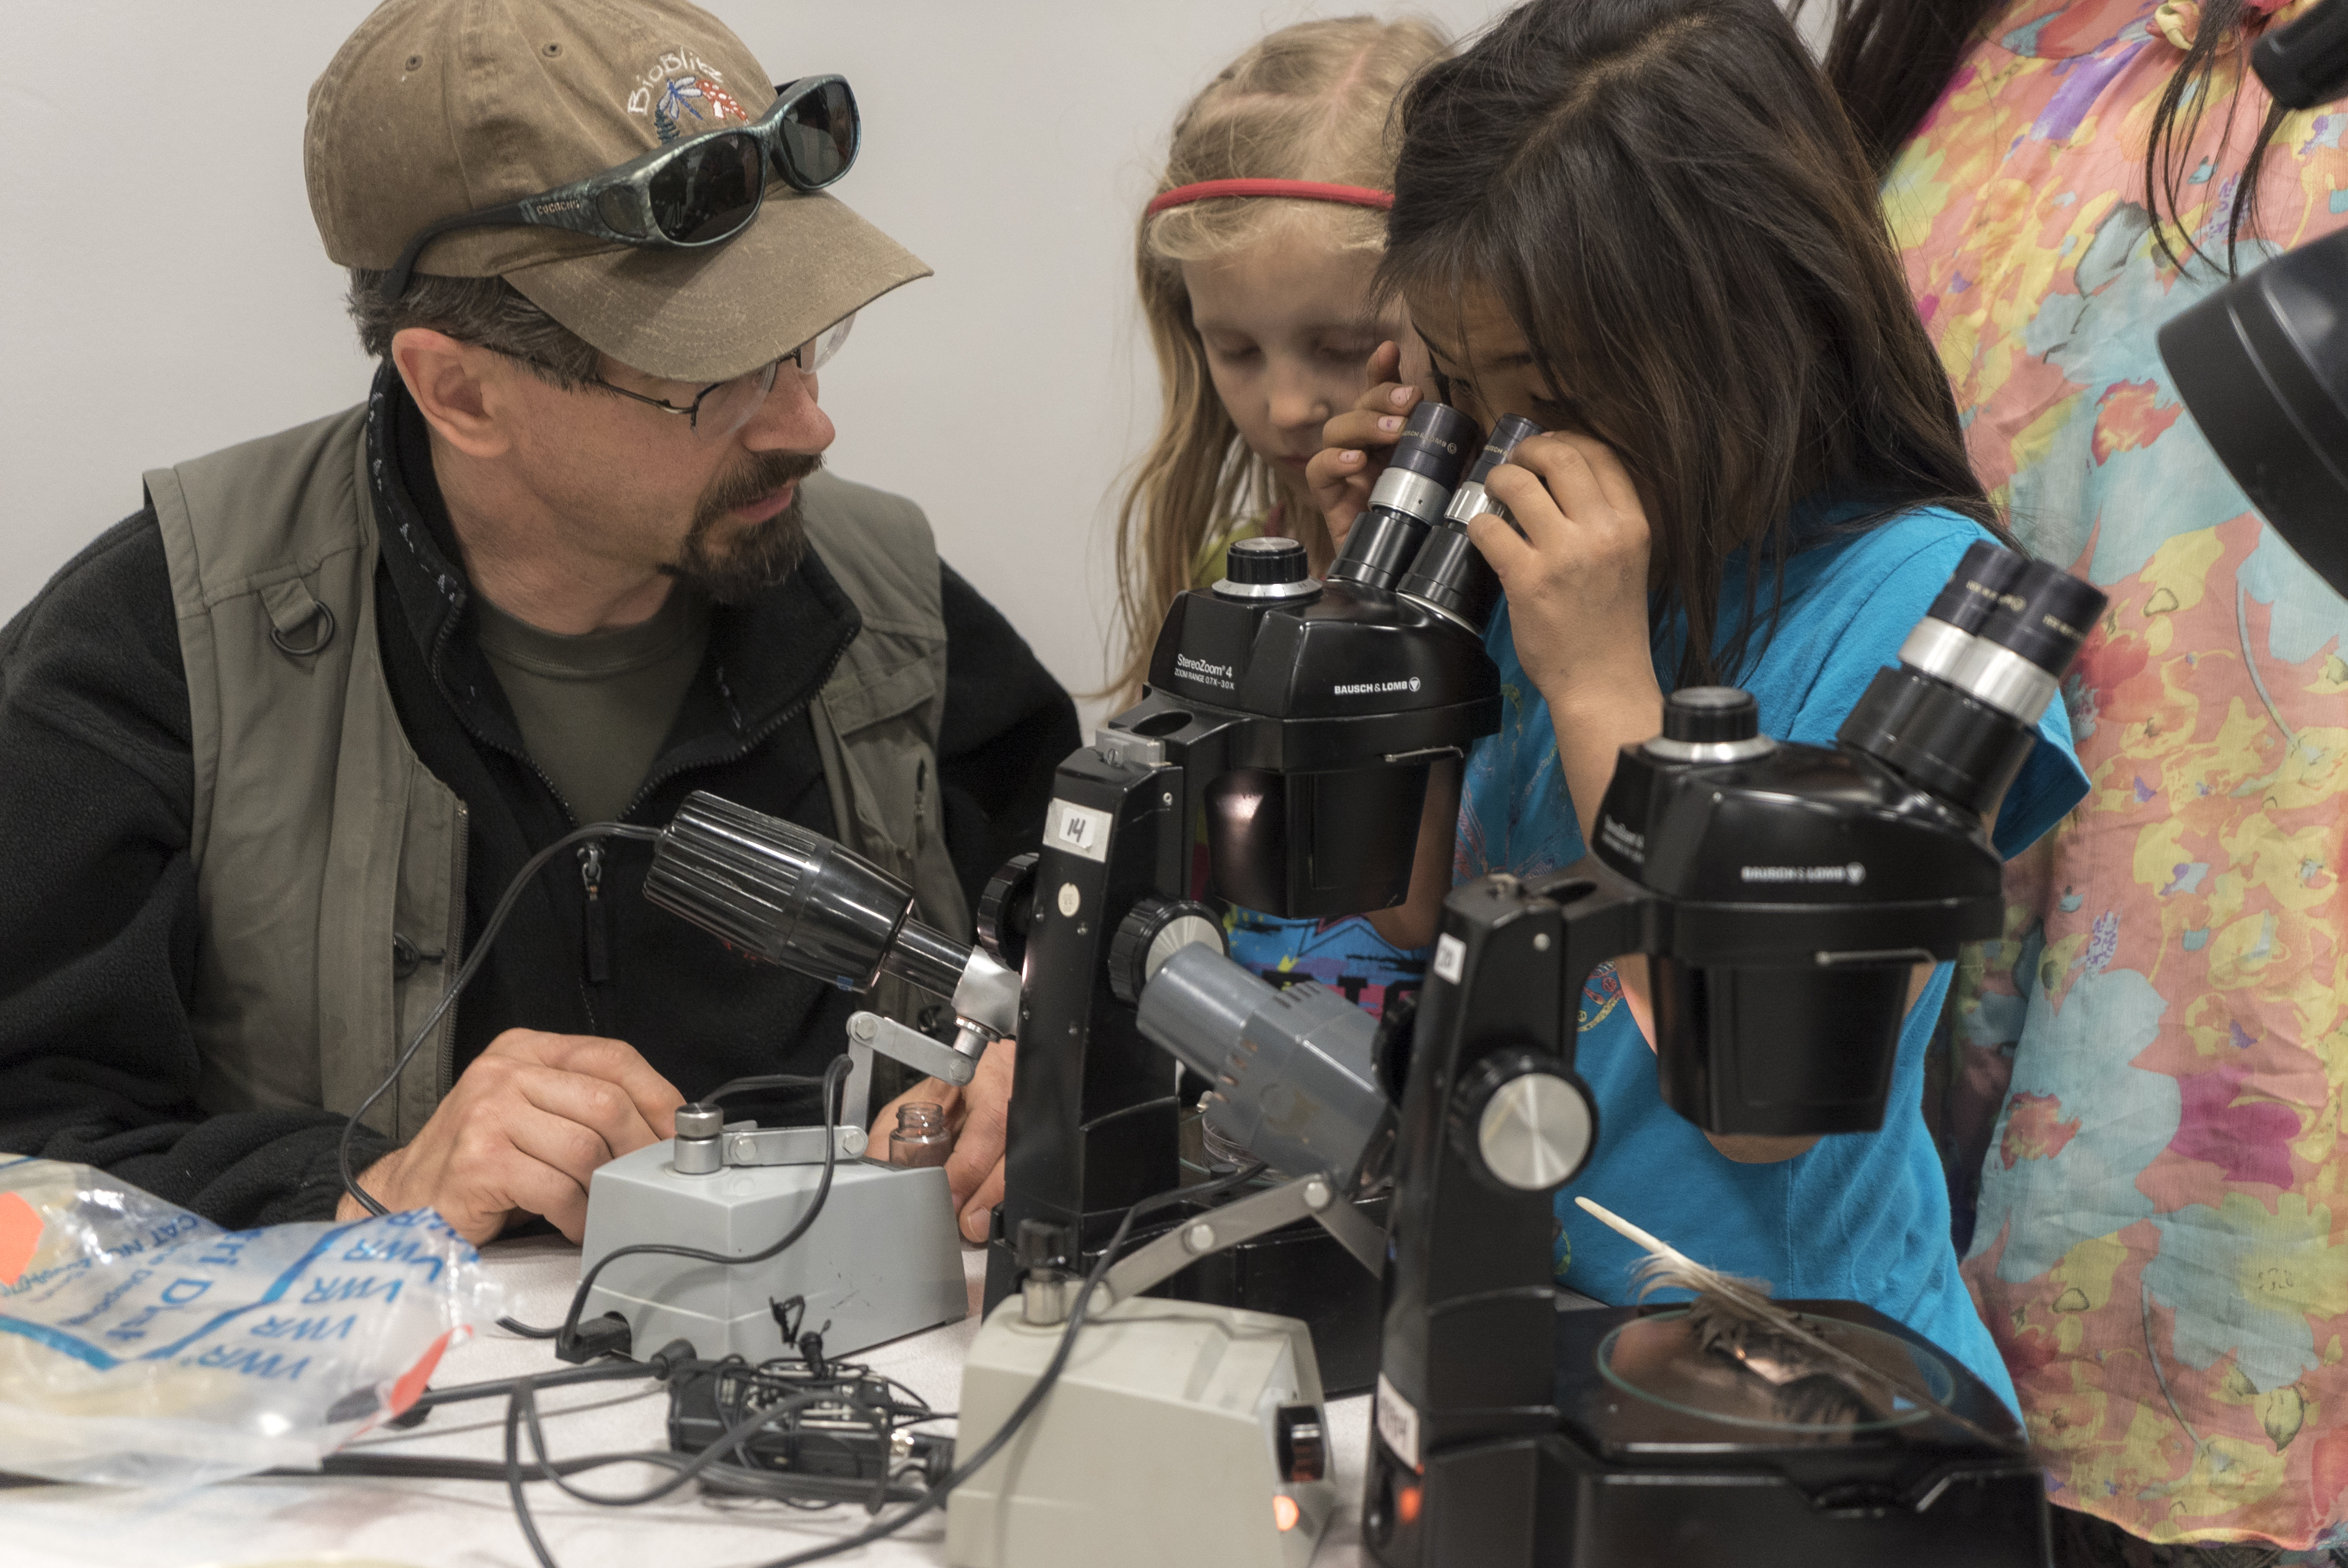 Seven-year-old Anna Nukapigak looks through a microscope at samples. (Photo courtesy of the National Park Service)